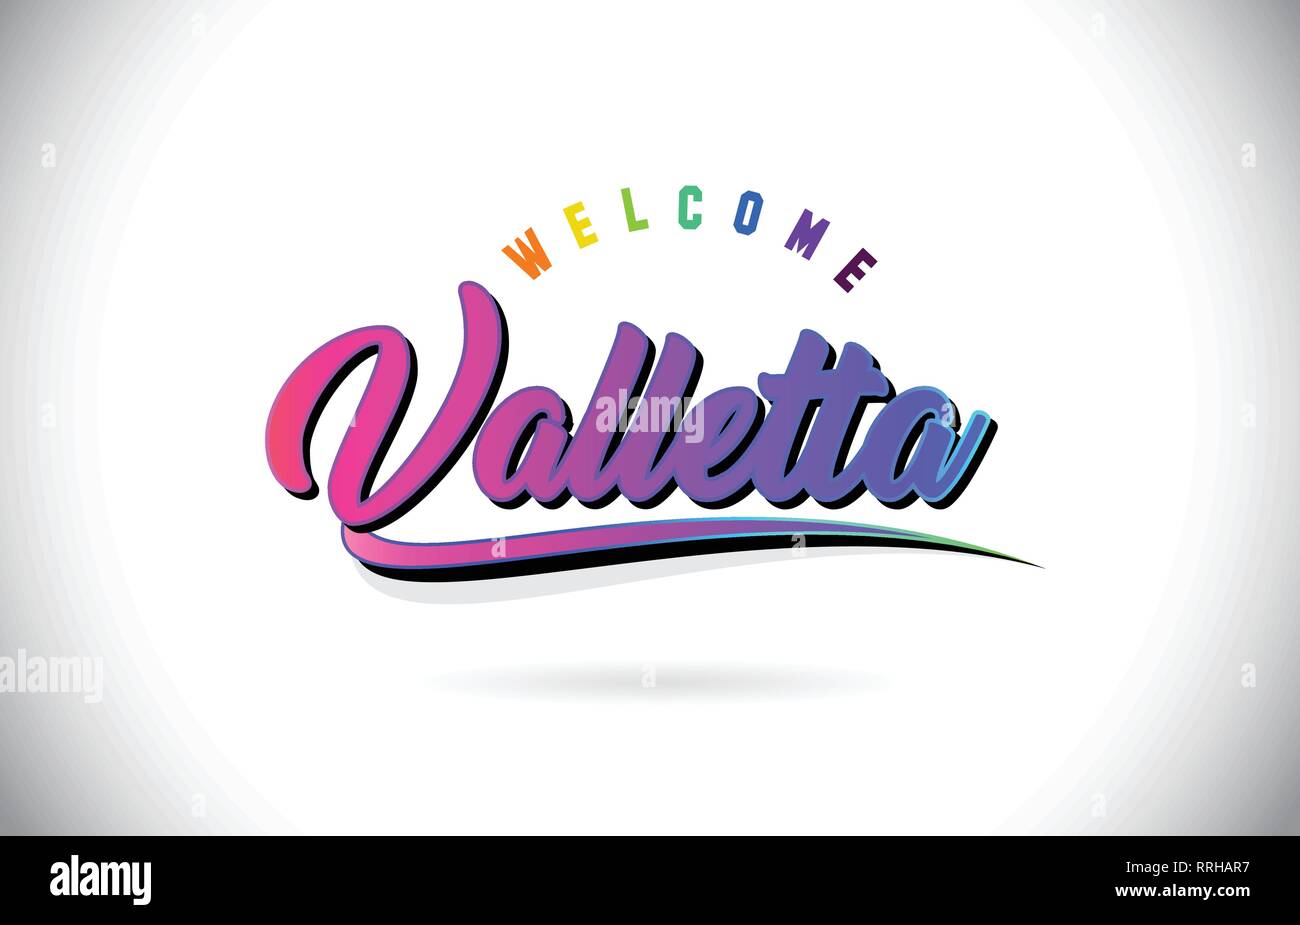 Valletta Welcome To Word Text with Creative Purple Pink Handwritten Font and Swoosh Shape Design Vector Illustration. Stock Vector